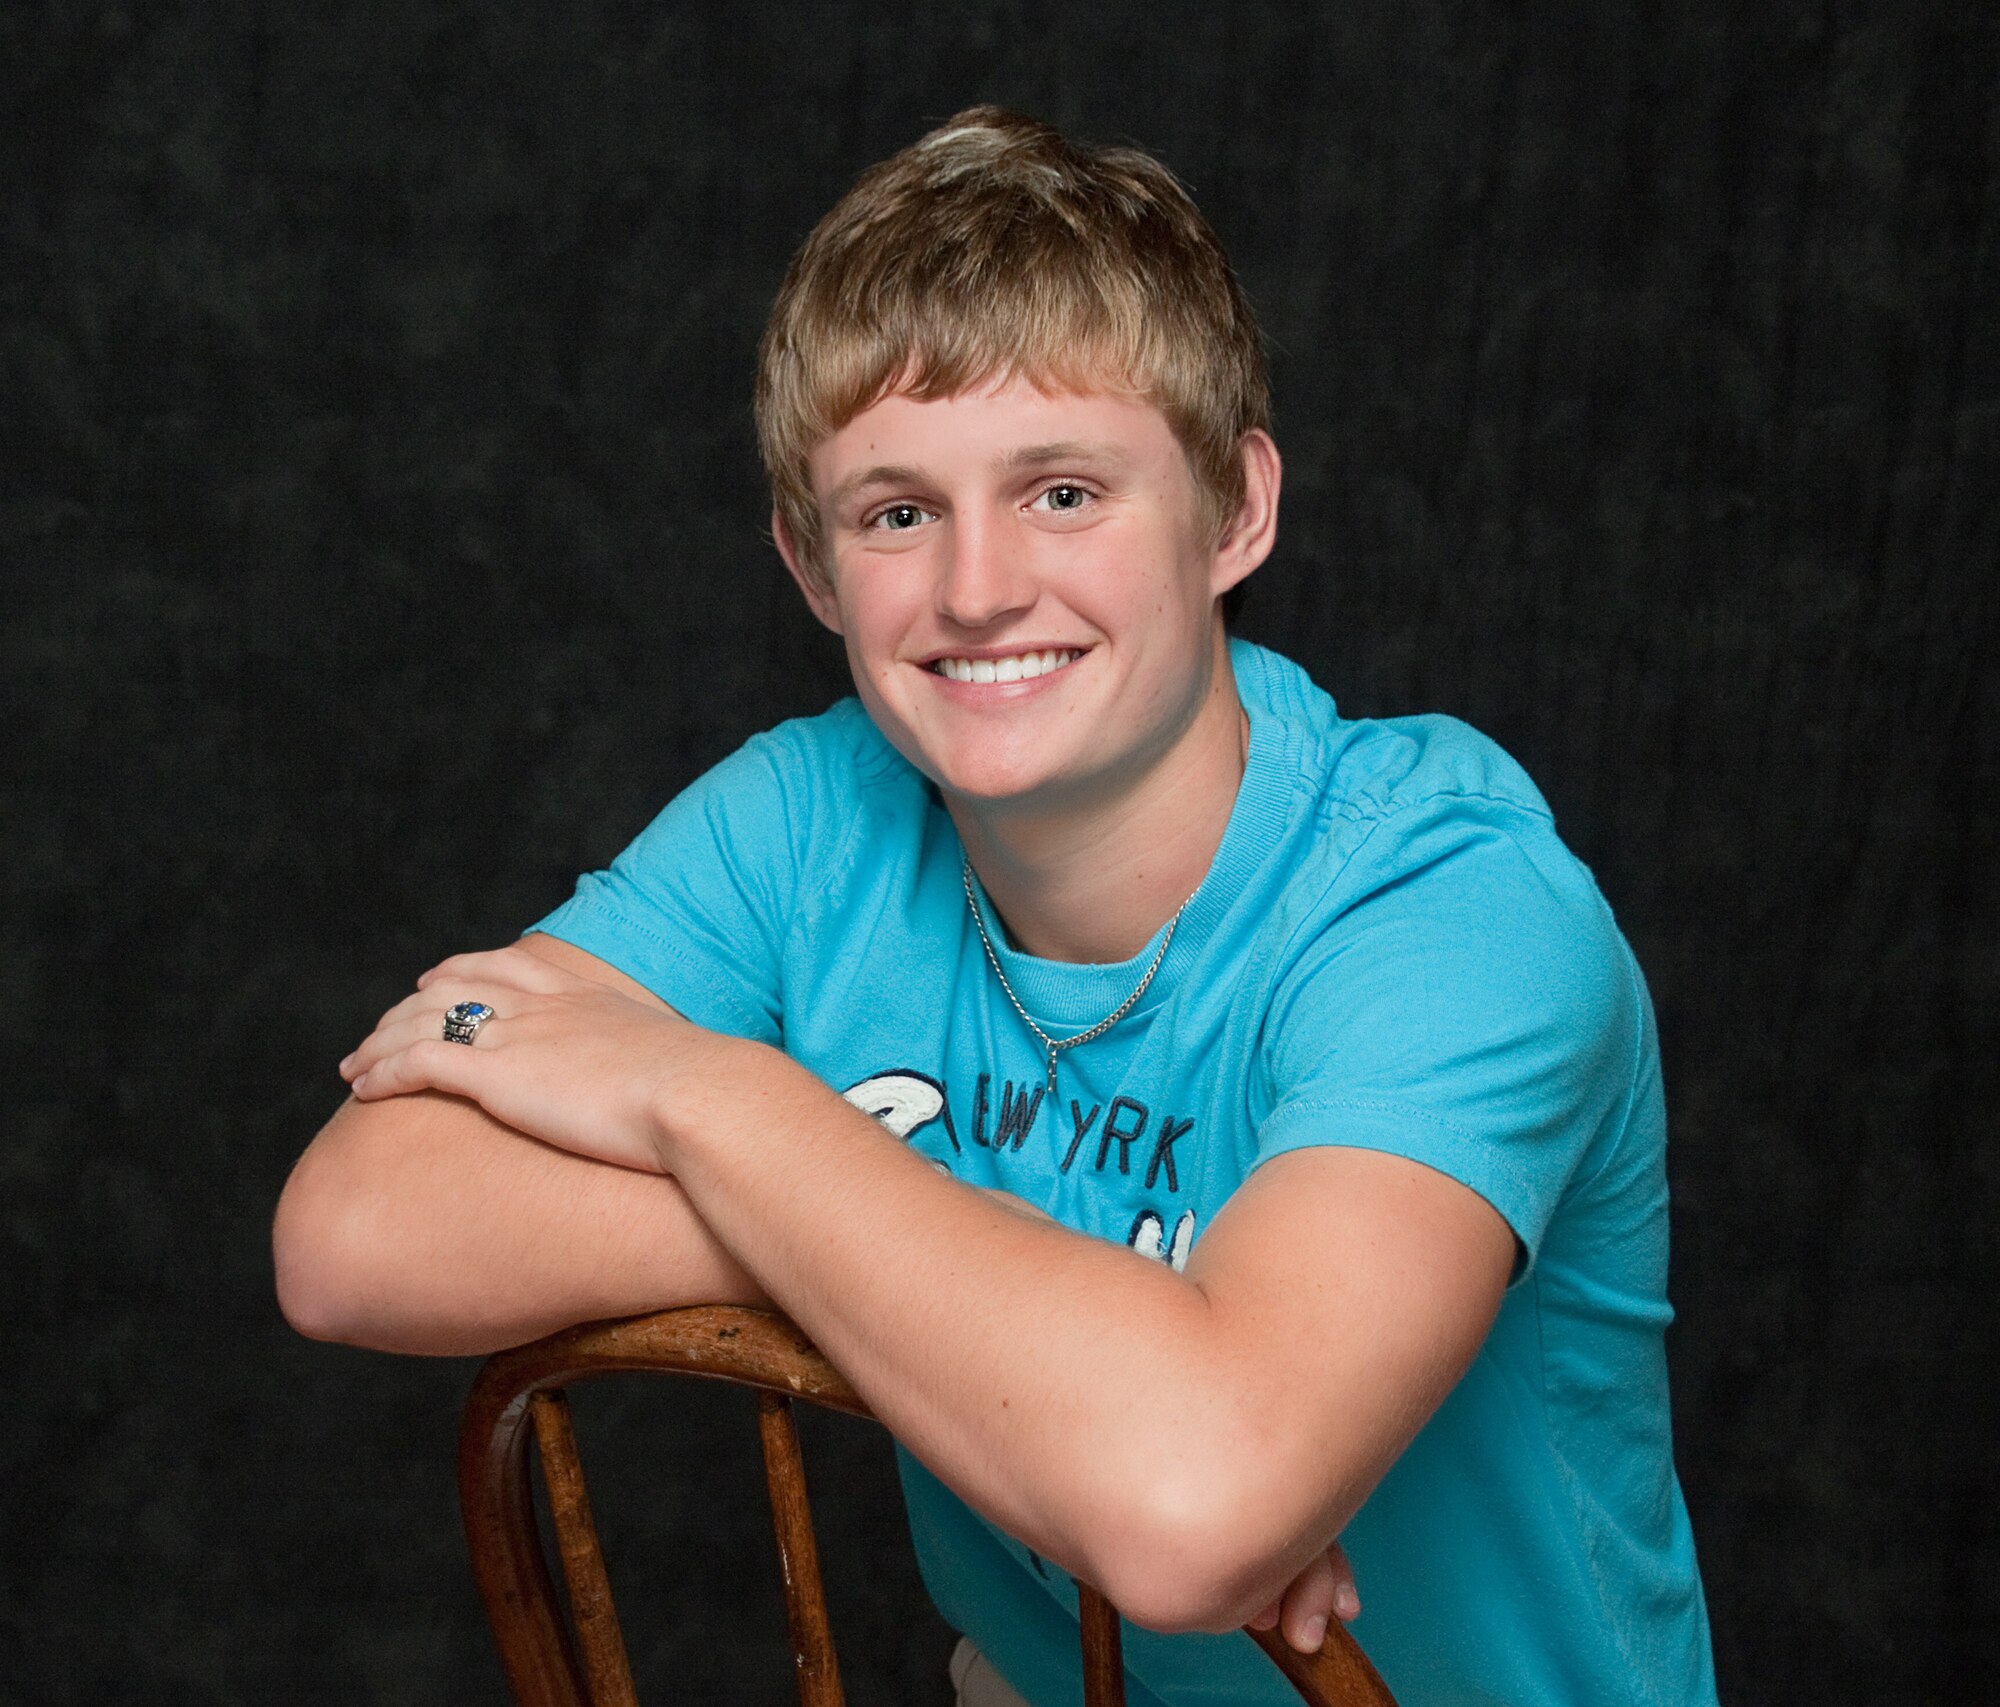 Colby Felts, a graduate from Remsen Union High School in Remsen, Iowa, was the recipient of this year’s Colonel V. Thomas Considine academic scholarship. Felts plans attend the University of South Dakota in the fall.